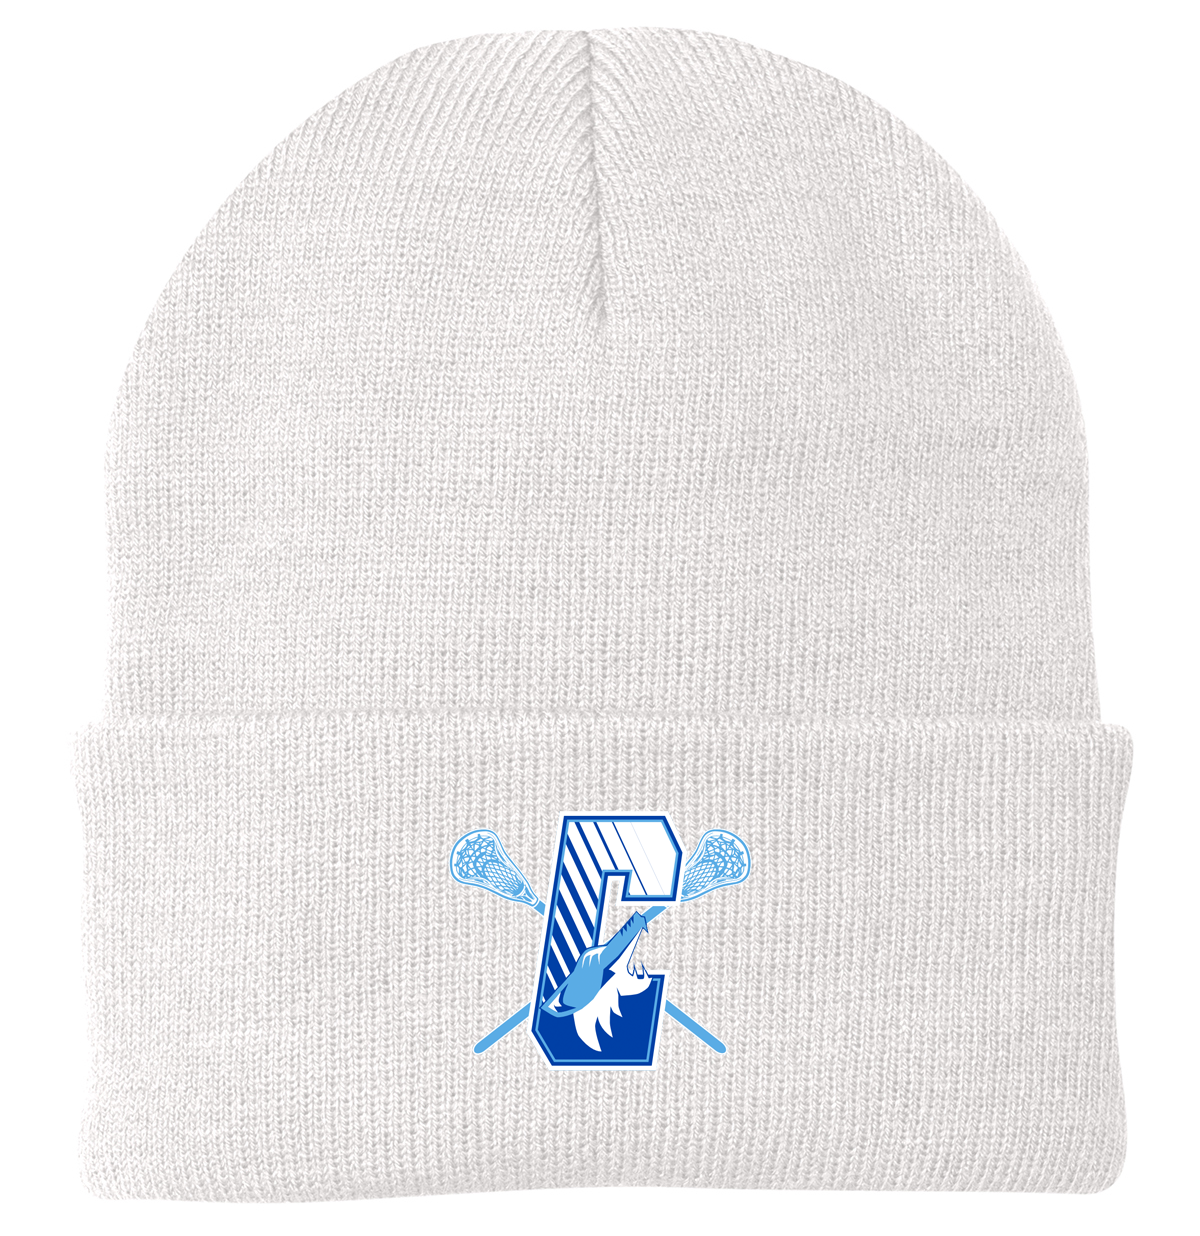 Coyotes Lacrosse Knit Beanie